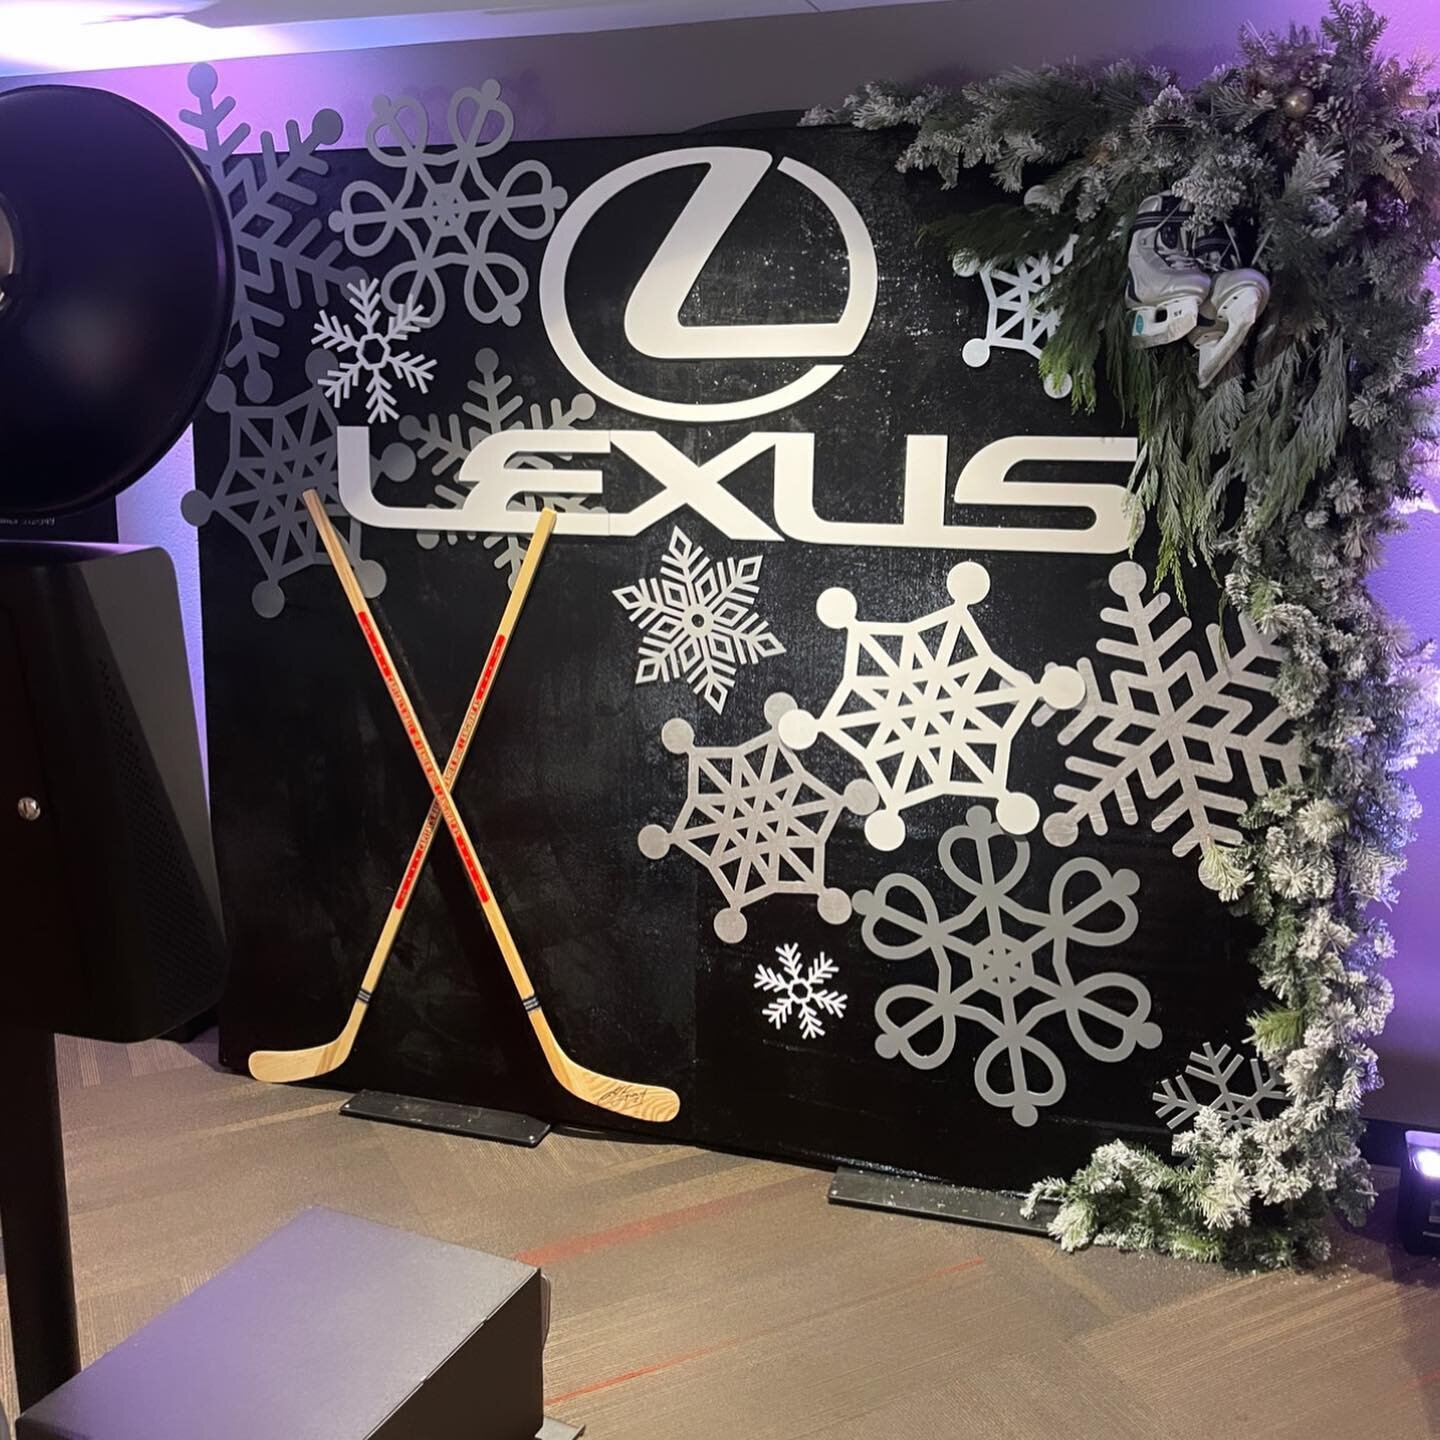 Our set up and sample print for the Lexus Suite Level party last December at Capital One Arena for the Caps vs Penguins game. Shout out to our fam @brightlyeverafter for providing the sweet Lexus hockey backdrop with custom cut out logo and snowflake